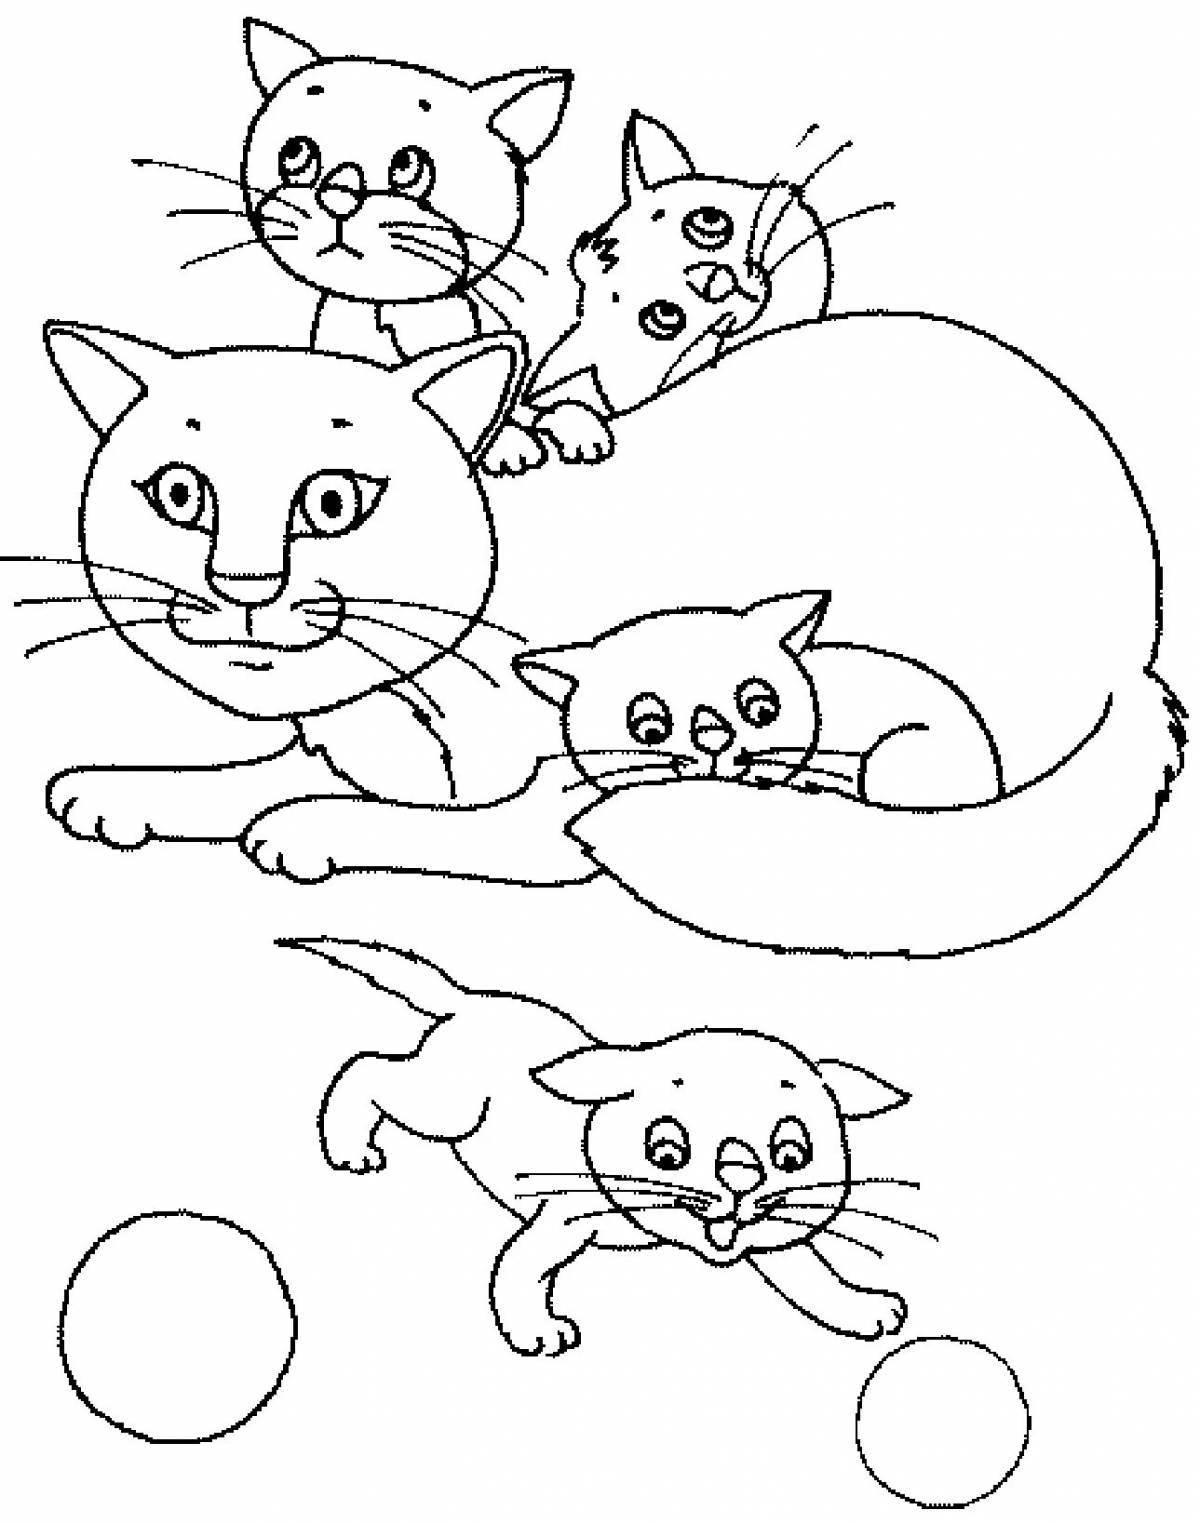 Adorable kittens coloring book for kids 6-7 years old